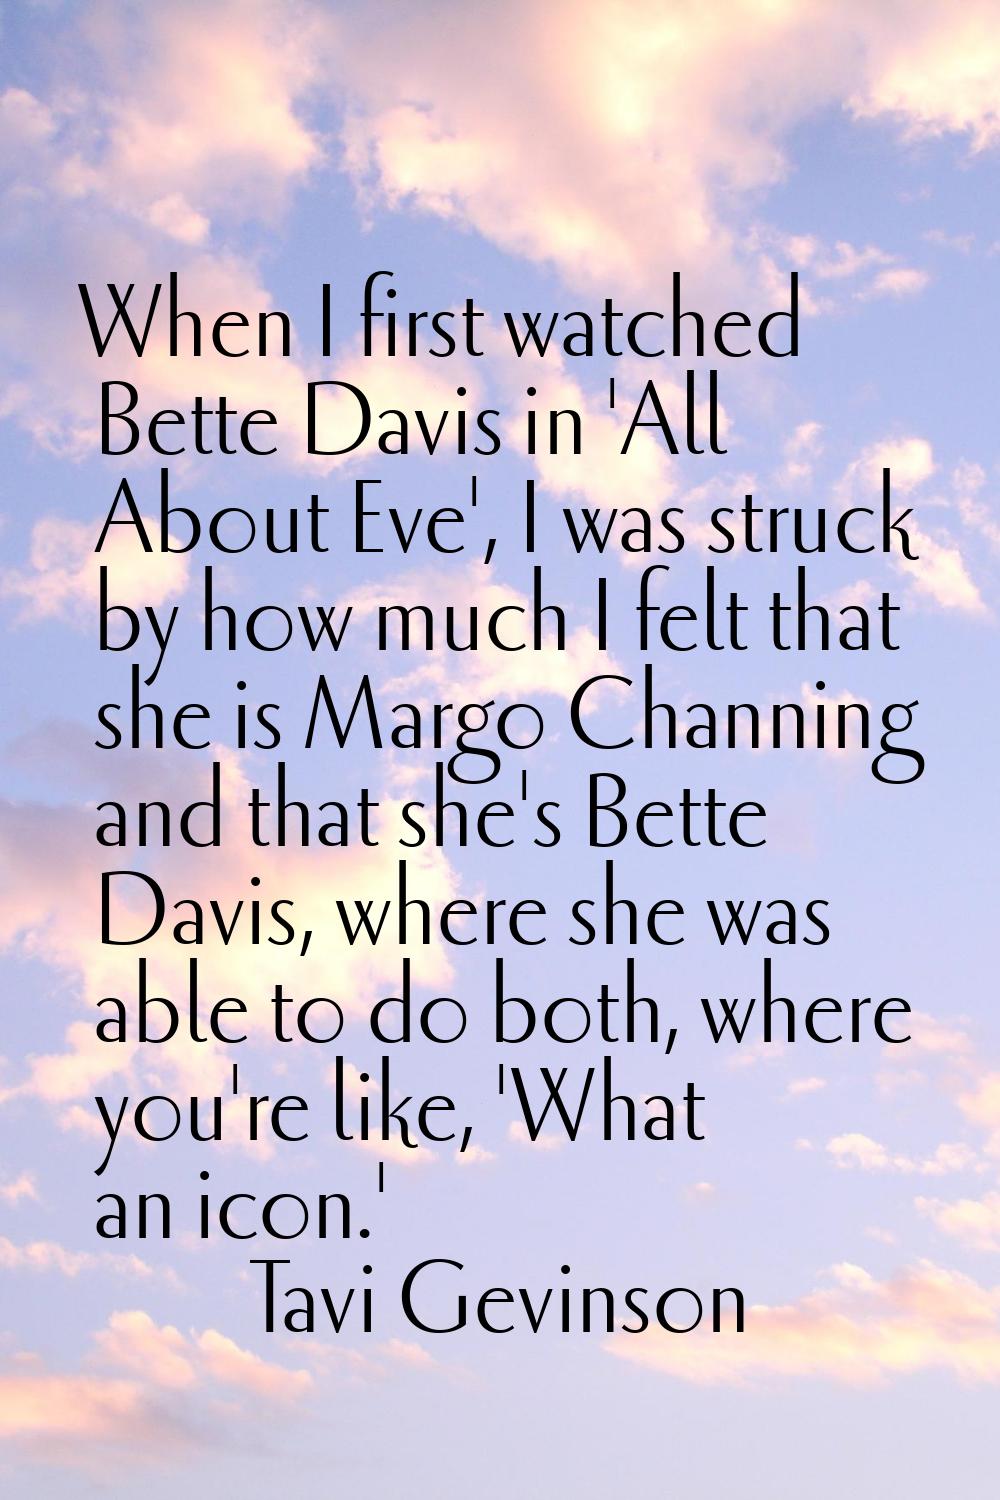 When I first watched Bette Davis in 'All About Eve', I was struck by how much I felt that she is Ma